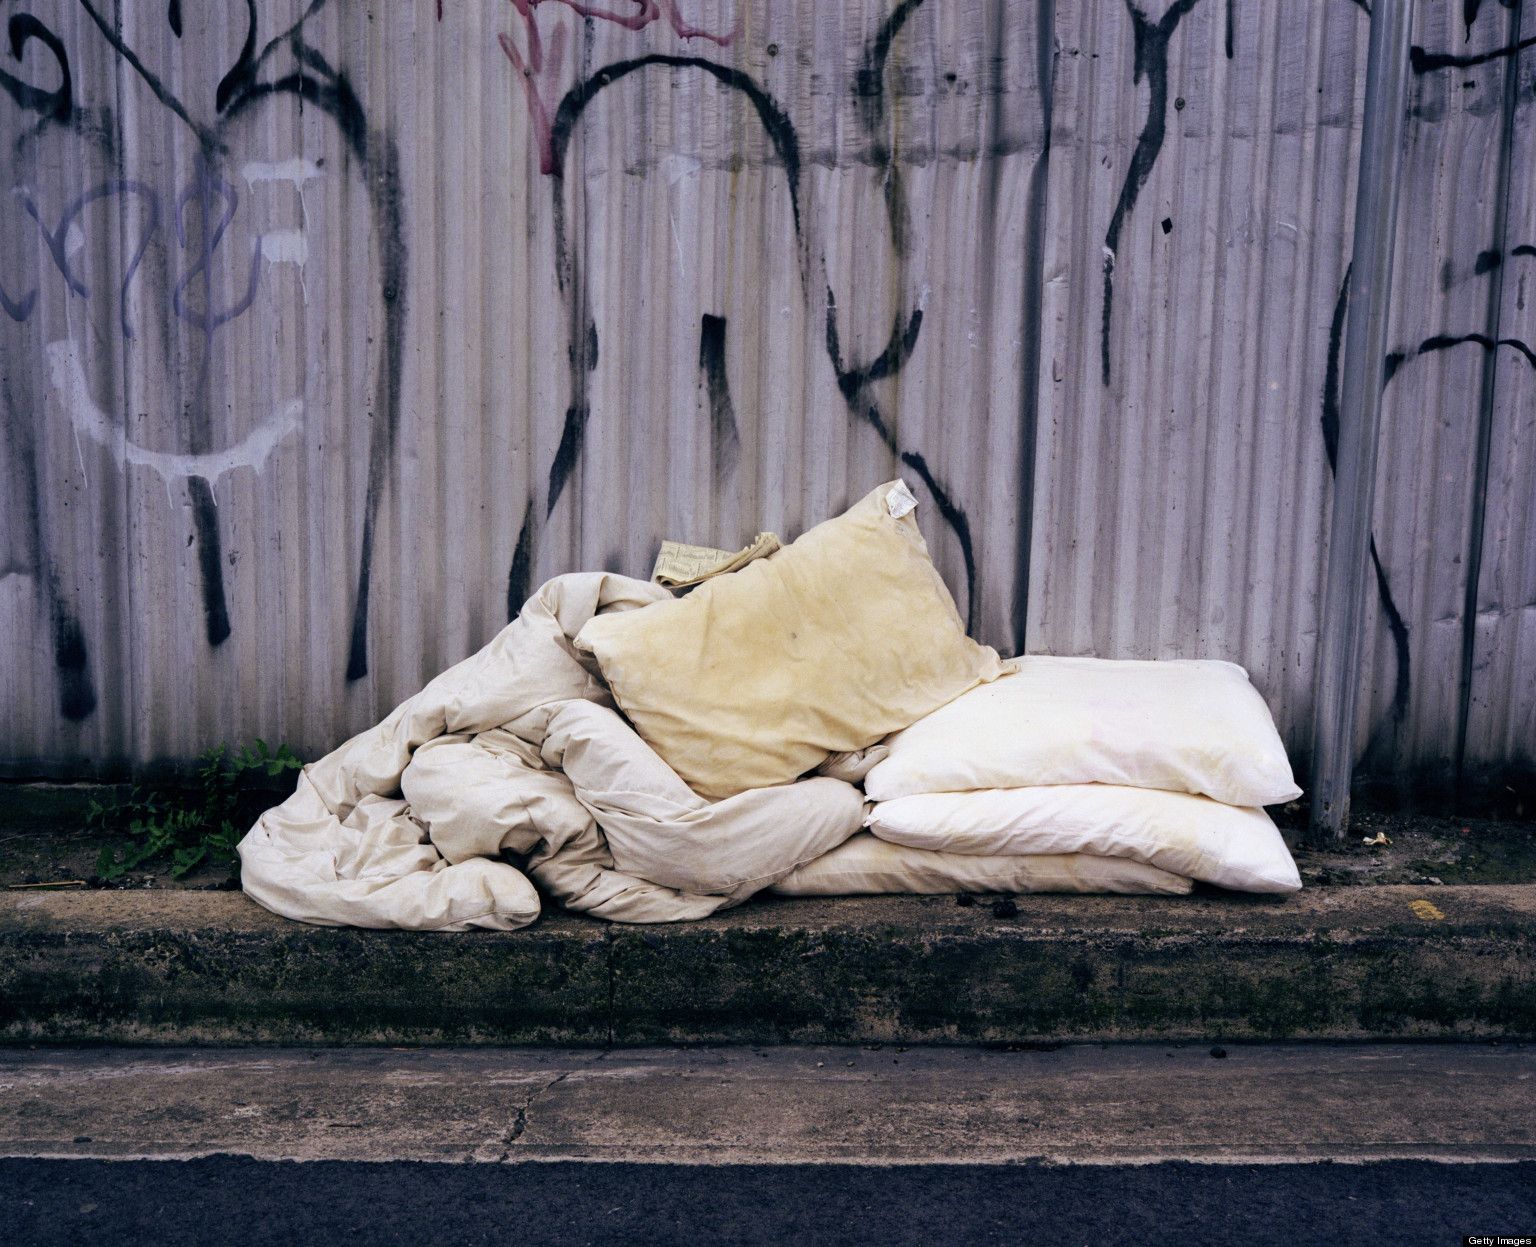 The Voiceless Shout: The homelessness and Art